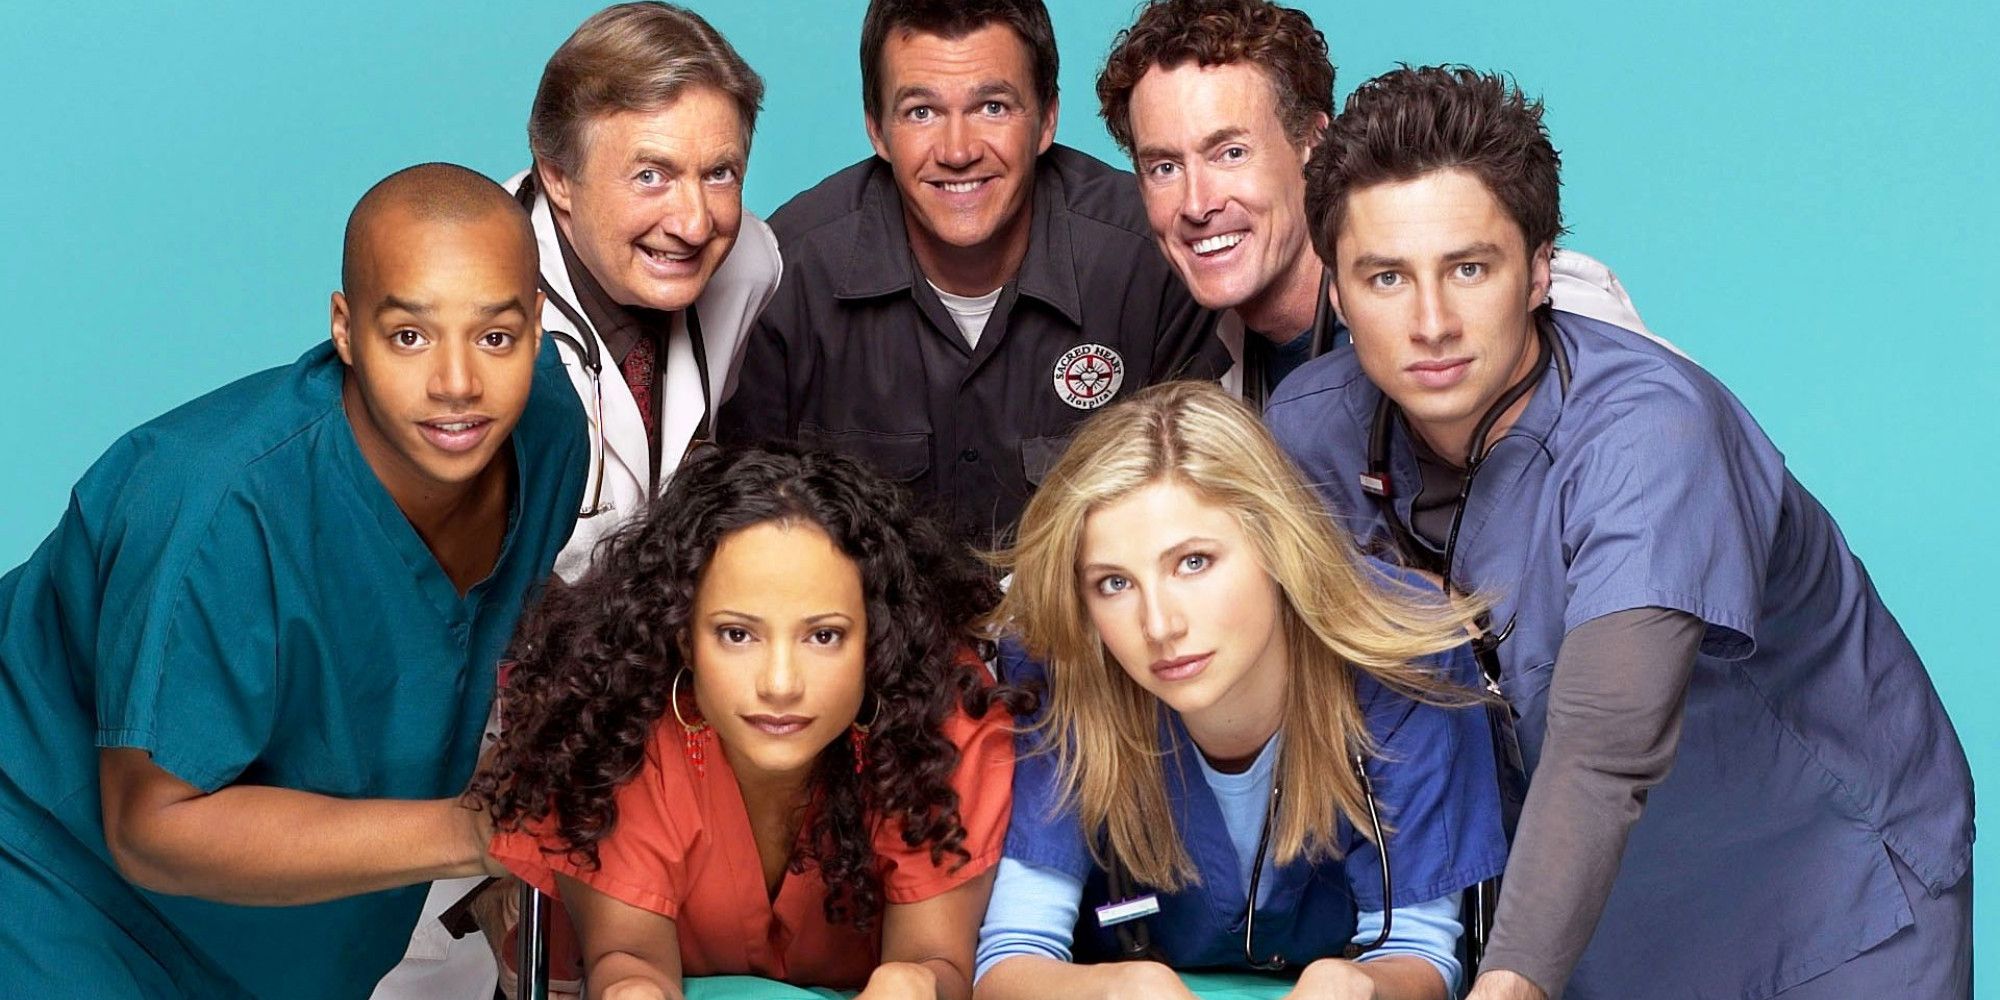 The cast of Scrubs comes together including Zach Braff, Donald Faison and Sarah Chalke